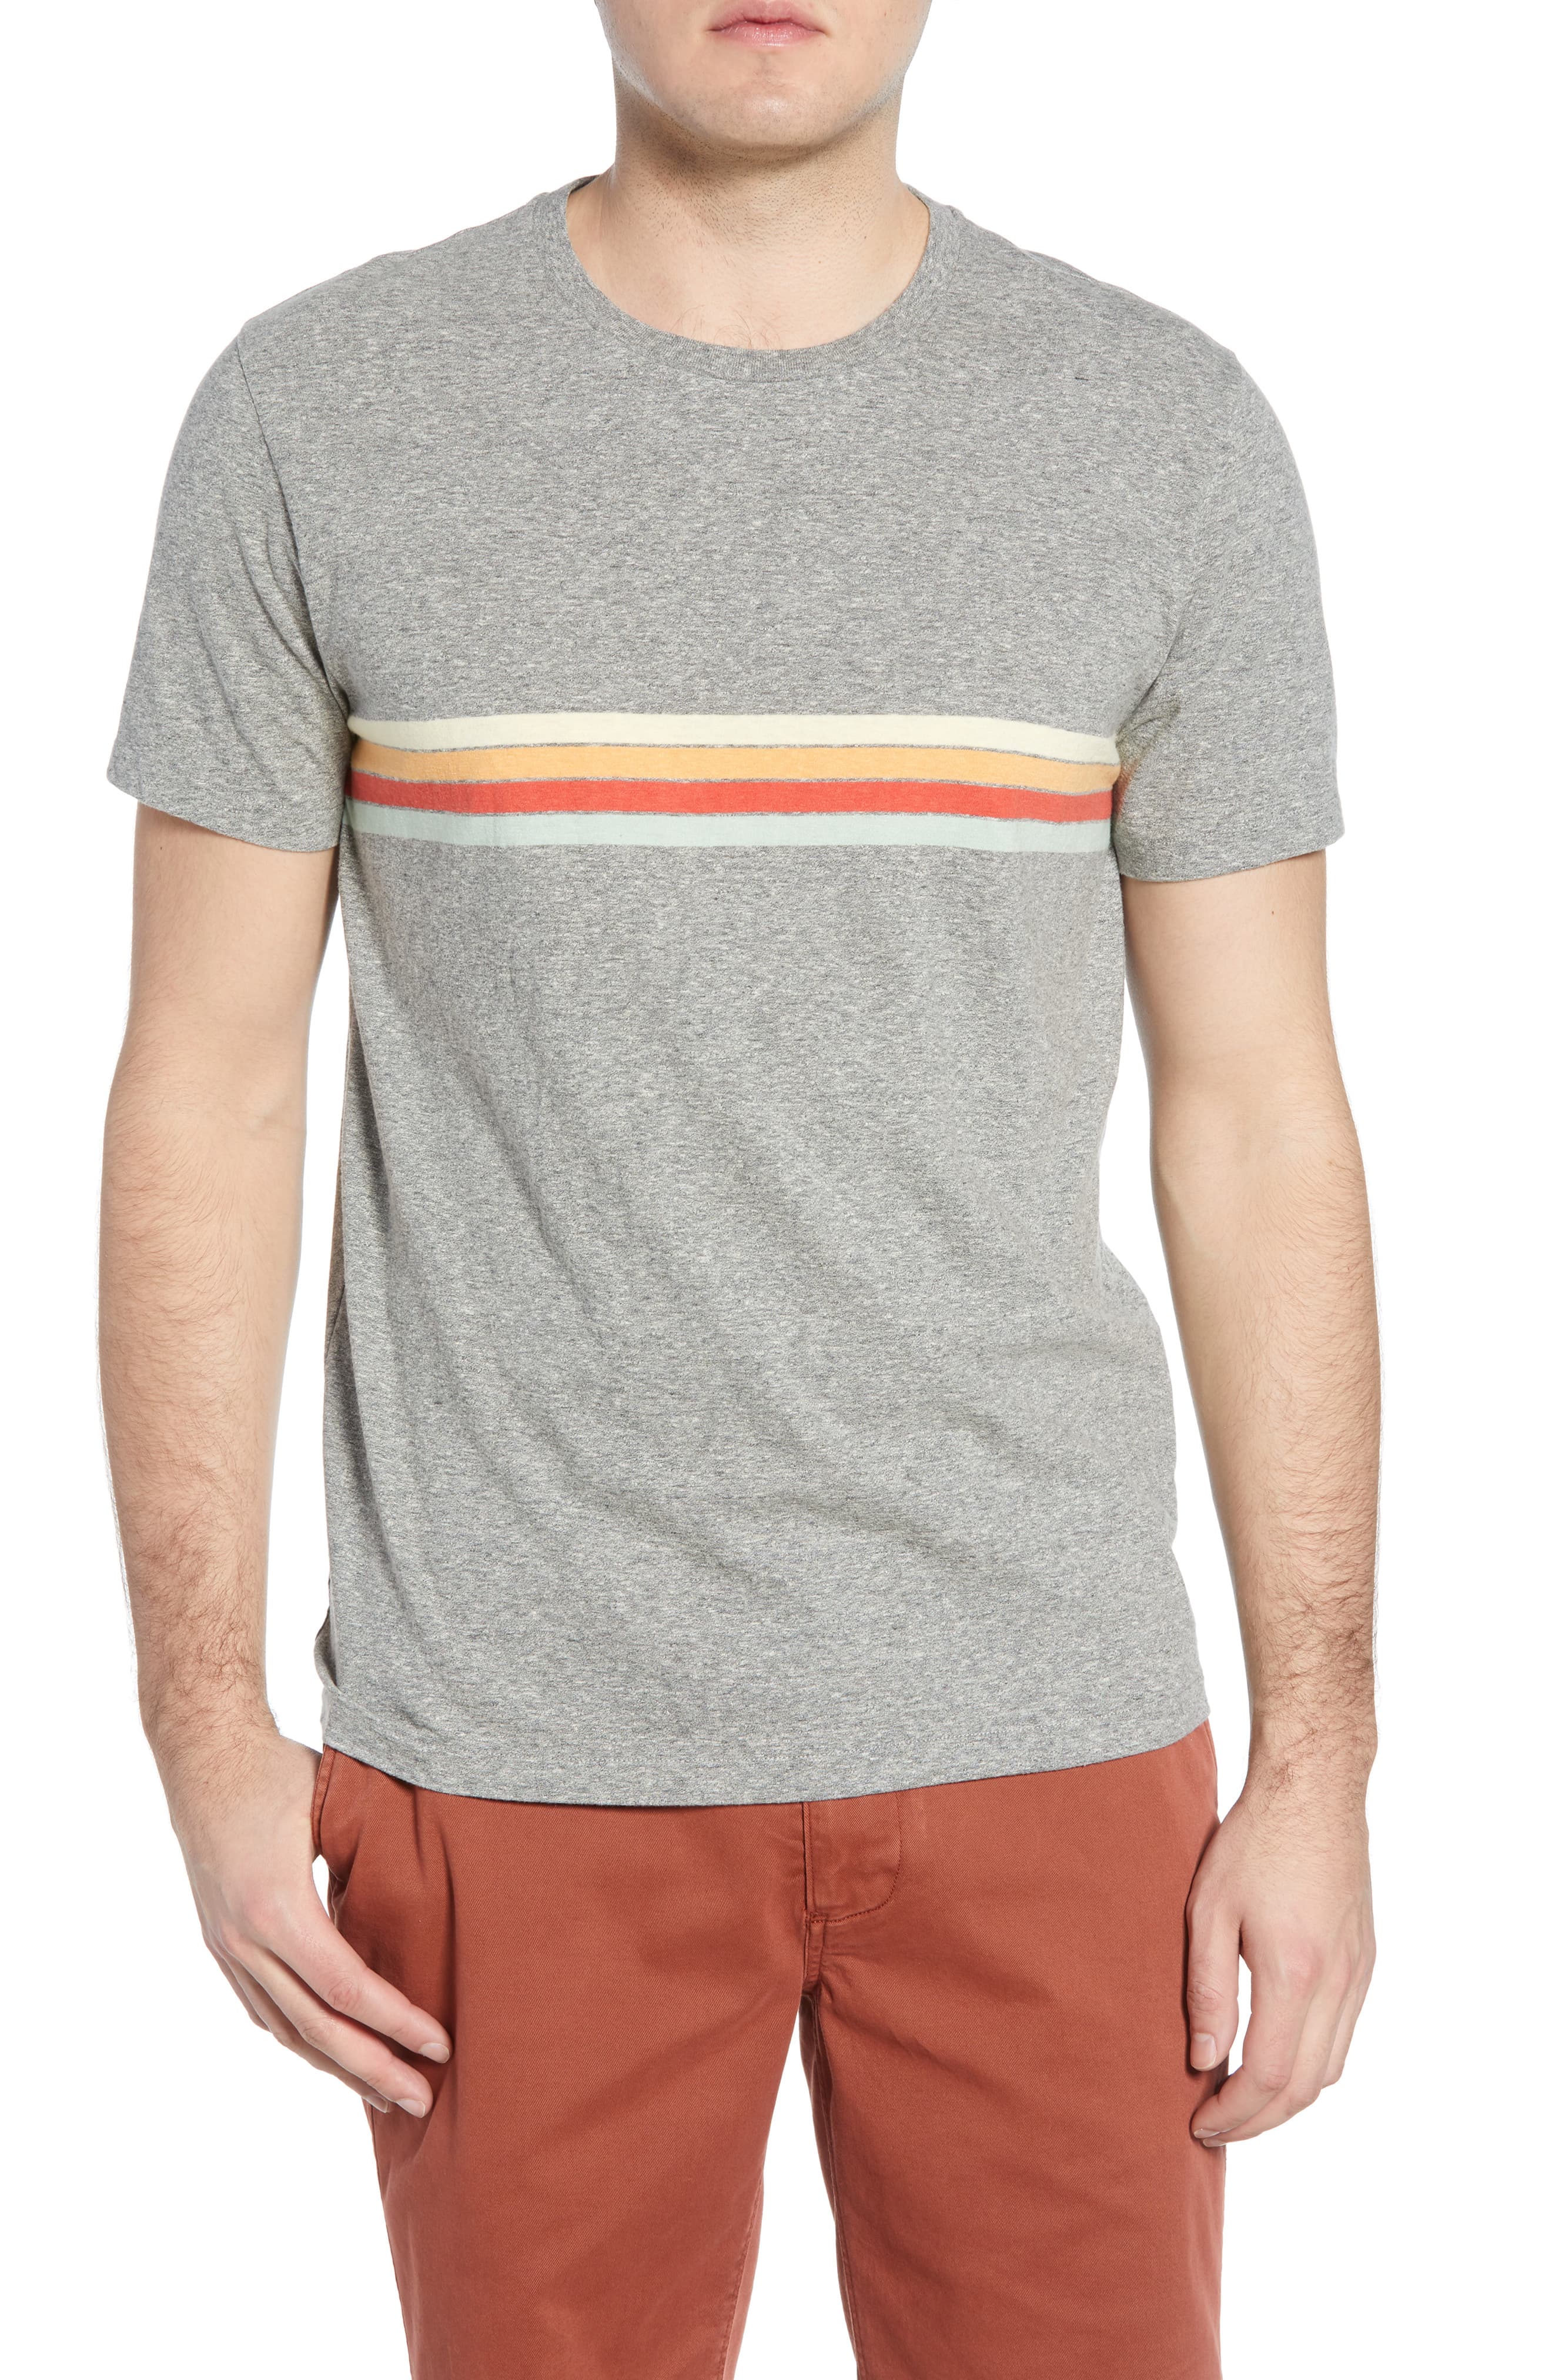 Men’s Madewell Allday Regular Fit Placed Stripe T-Shirt | The Fashionisto